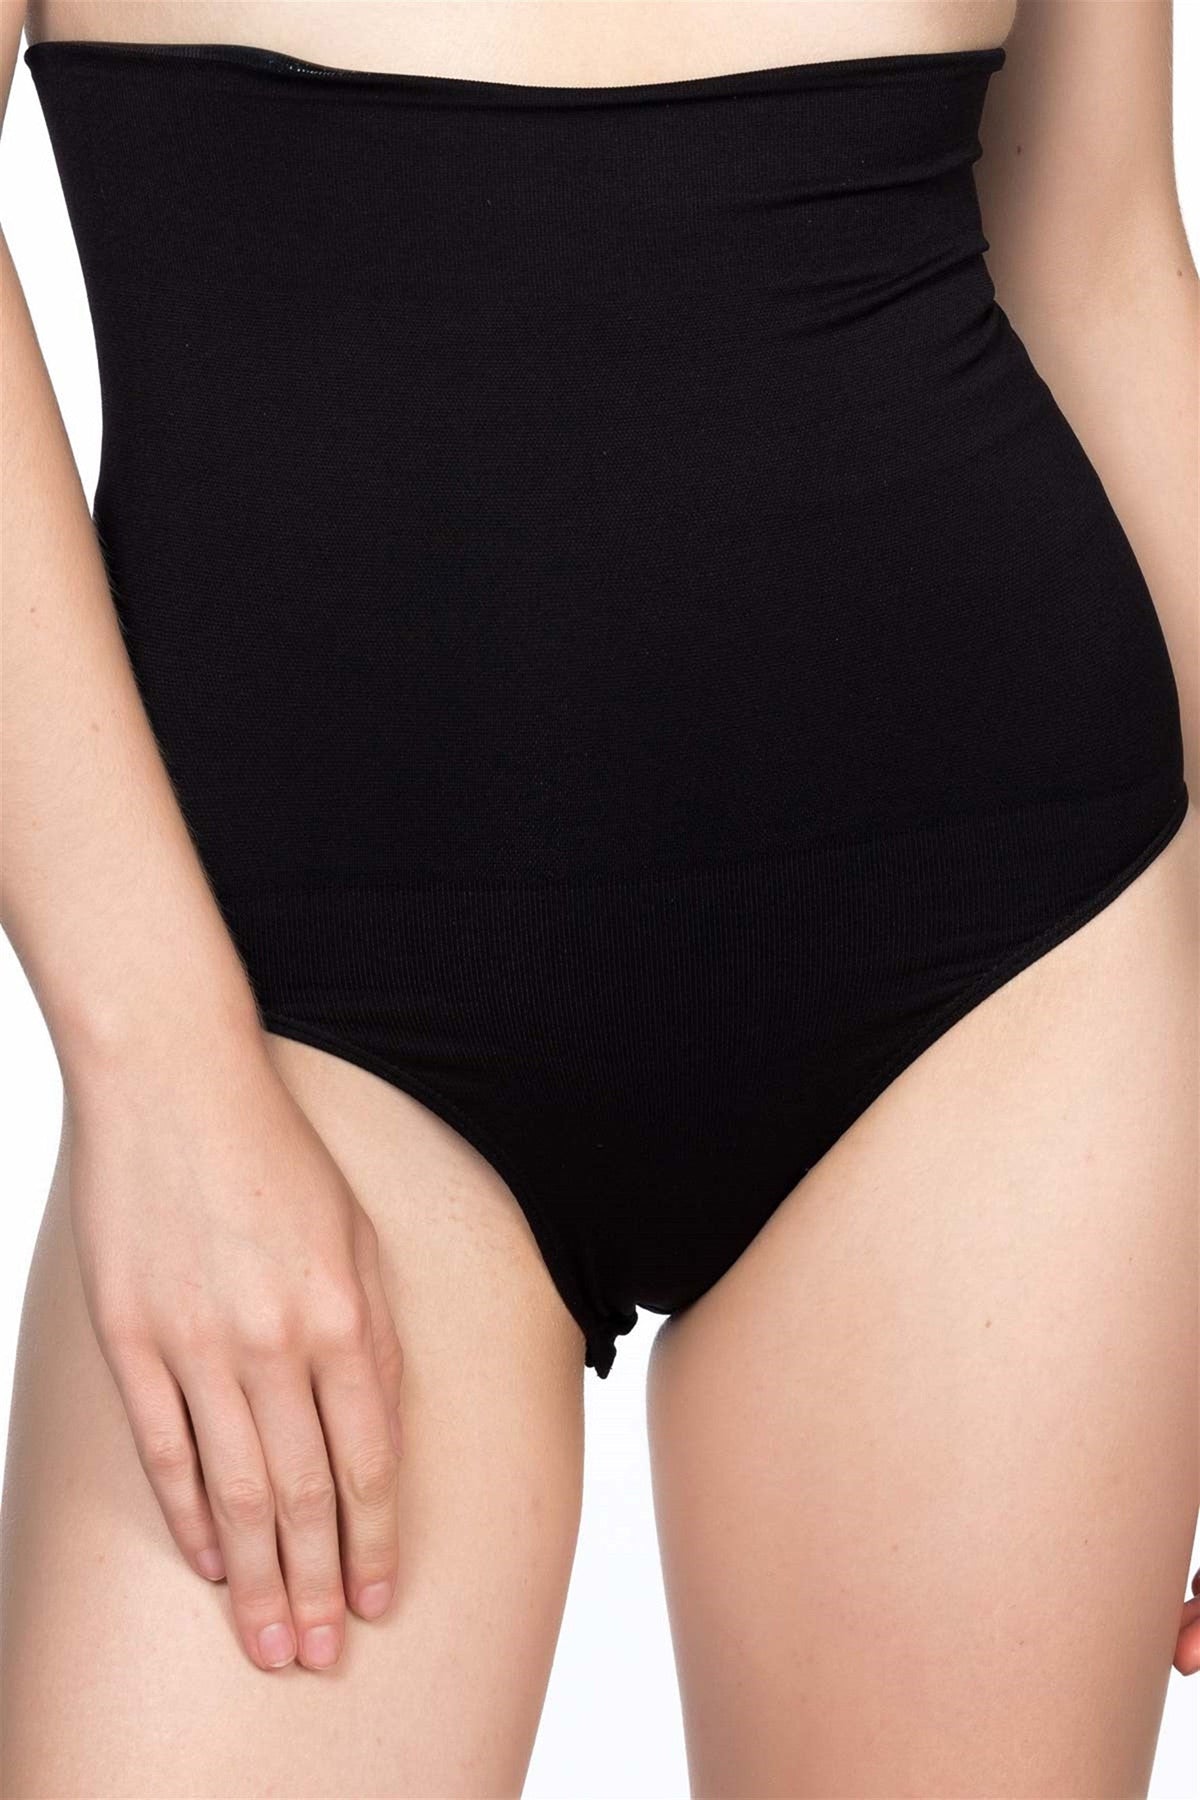 Seamless Double High-Waisted Snap-Crotch Postpartum Brief Corset Black - 2019